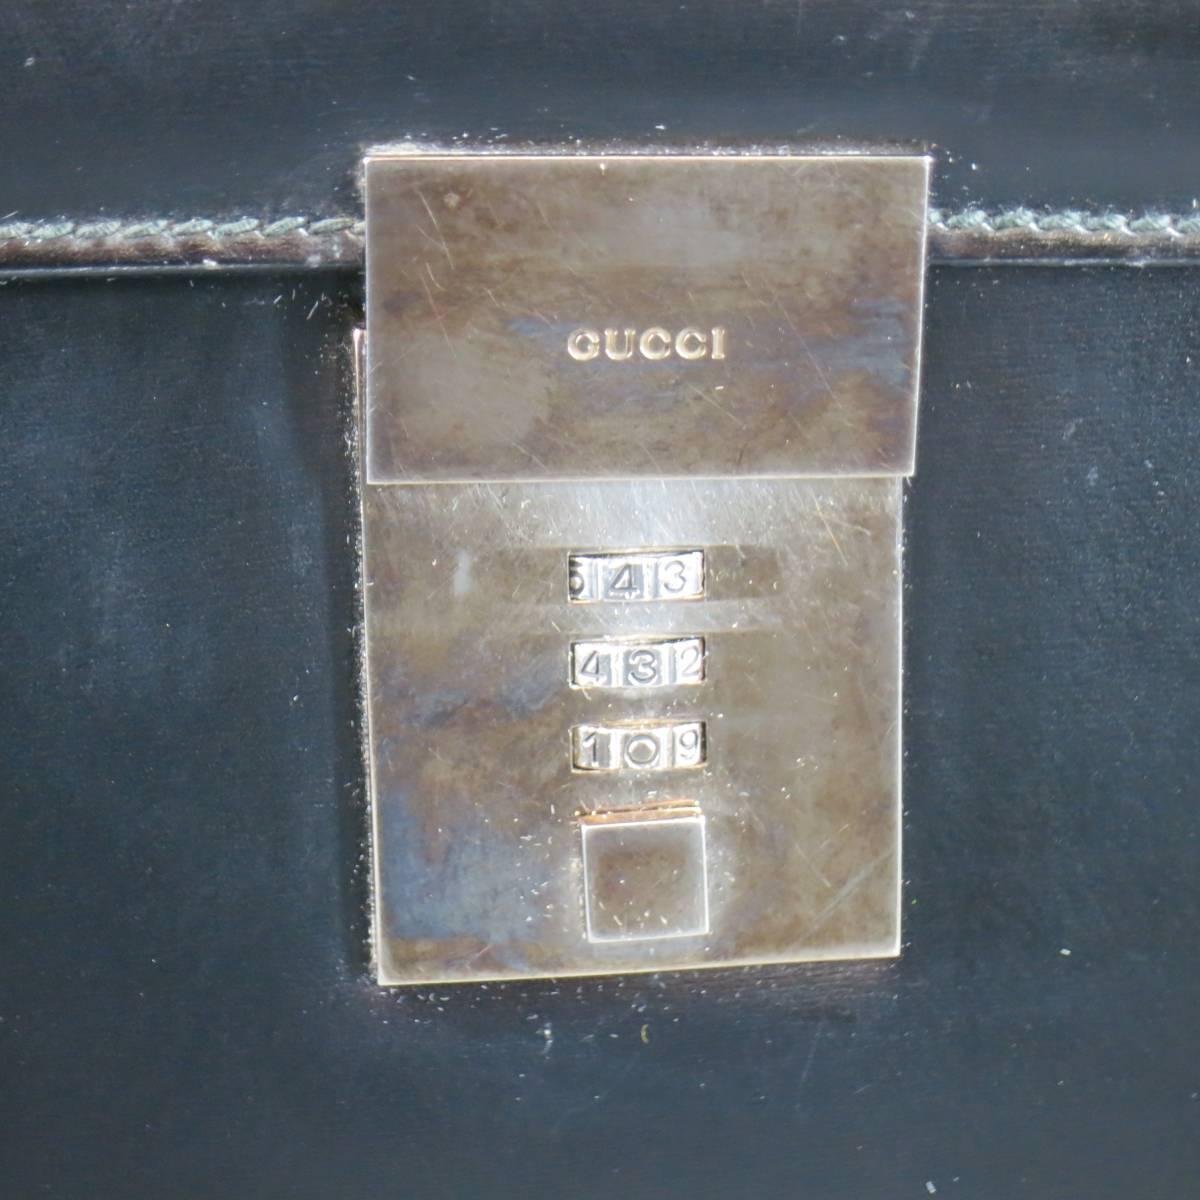 Vintage GUCCI briefcase in a shiny black leather featuring a flap top with silver tone metal combination closure, top handle and triple compartment storage. Wear throughout leather and tarnishing on hardwear. As-Is. Made in Italy.
 
Fair Pre-Owned